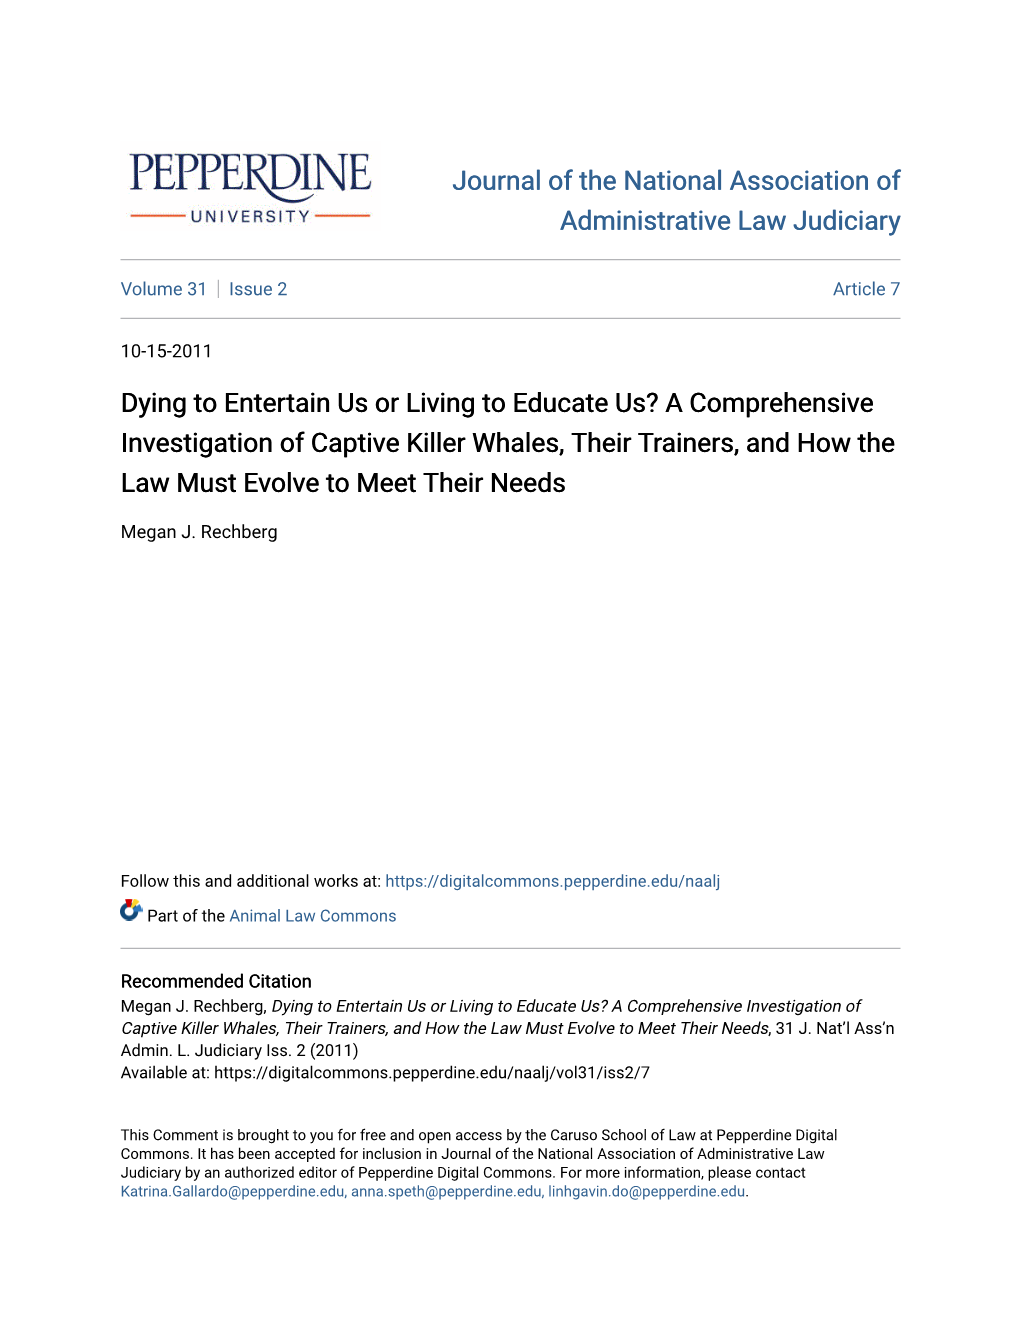 Dying to Entertain Us Or Living to Educate Us? a Comprehensive Investigation of Captive Killer Whales, Their Trainers, and How T